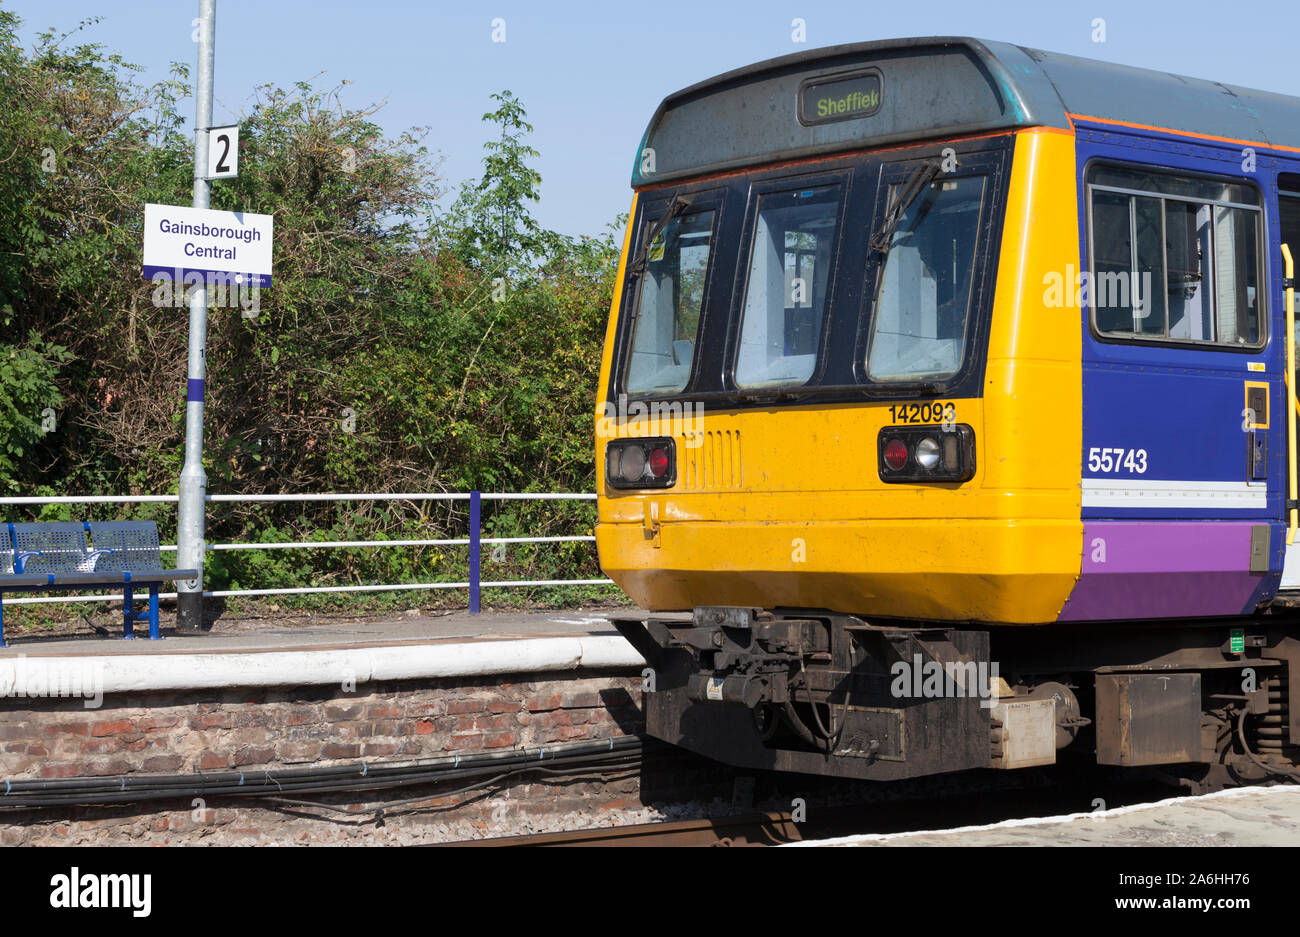 Arriva Northern rail class 142 pacer train at Gainsborough Central railway station Stock Photo